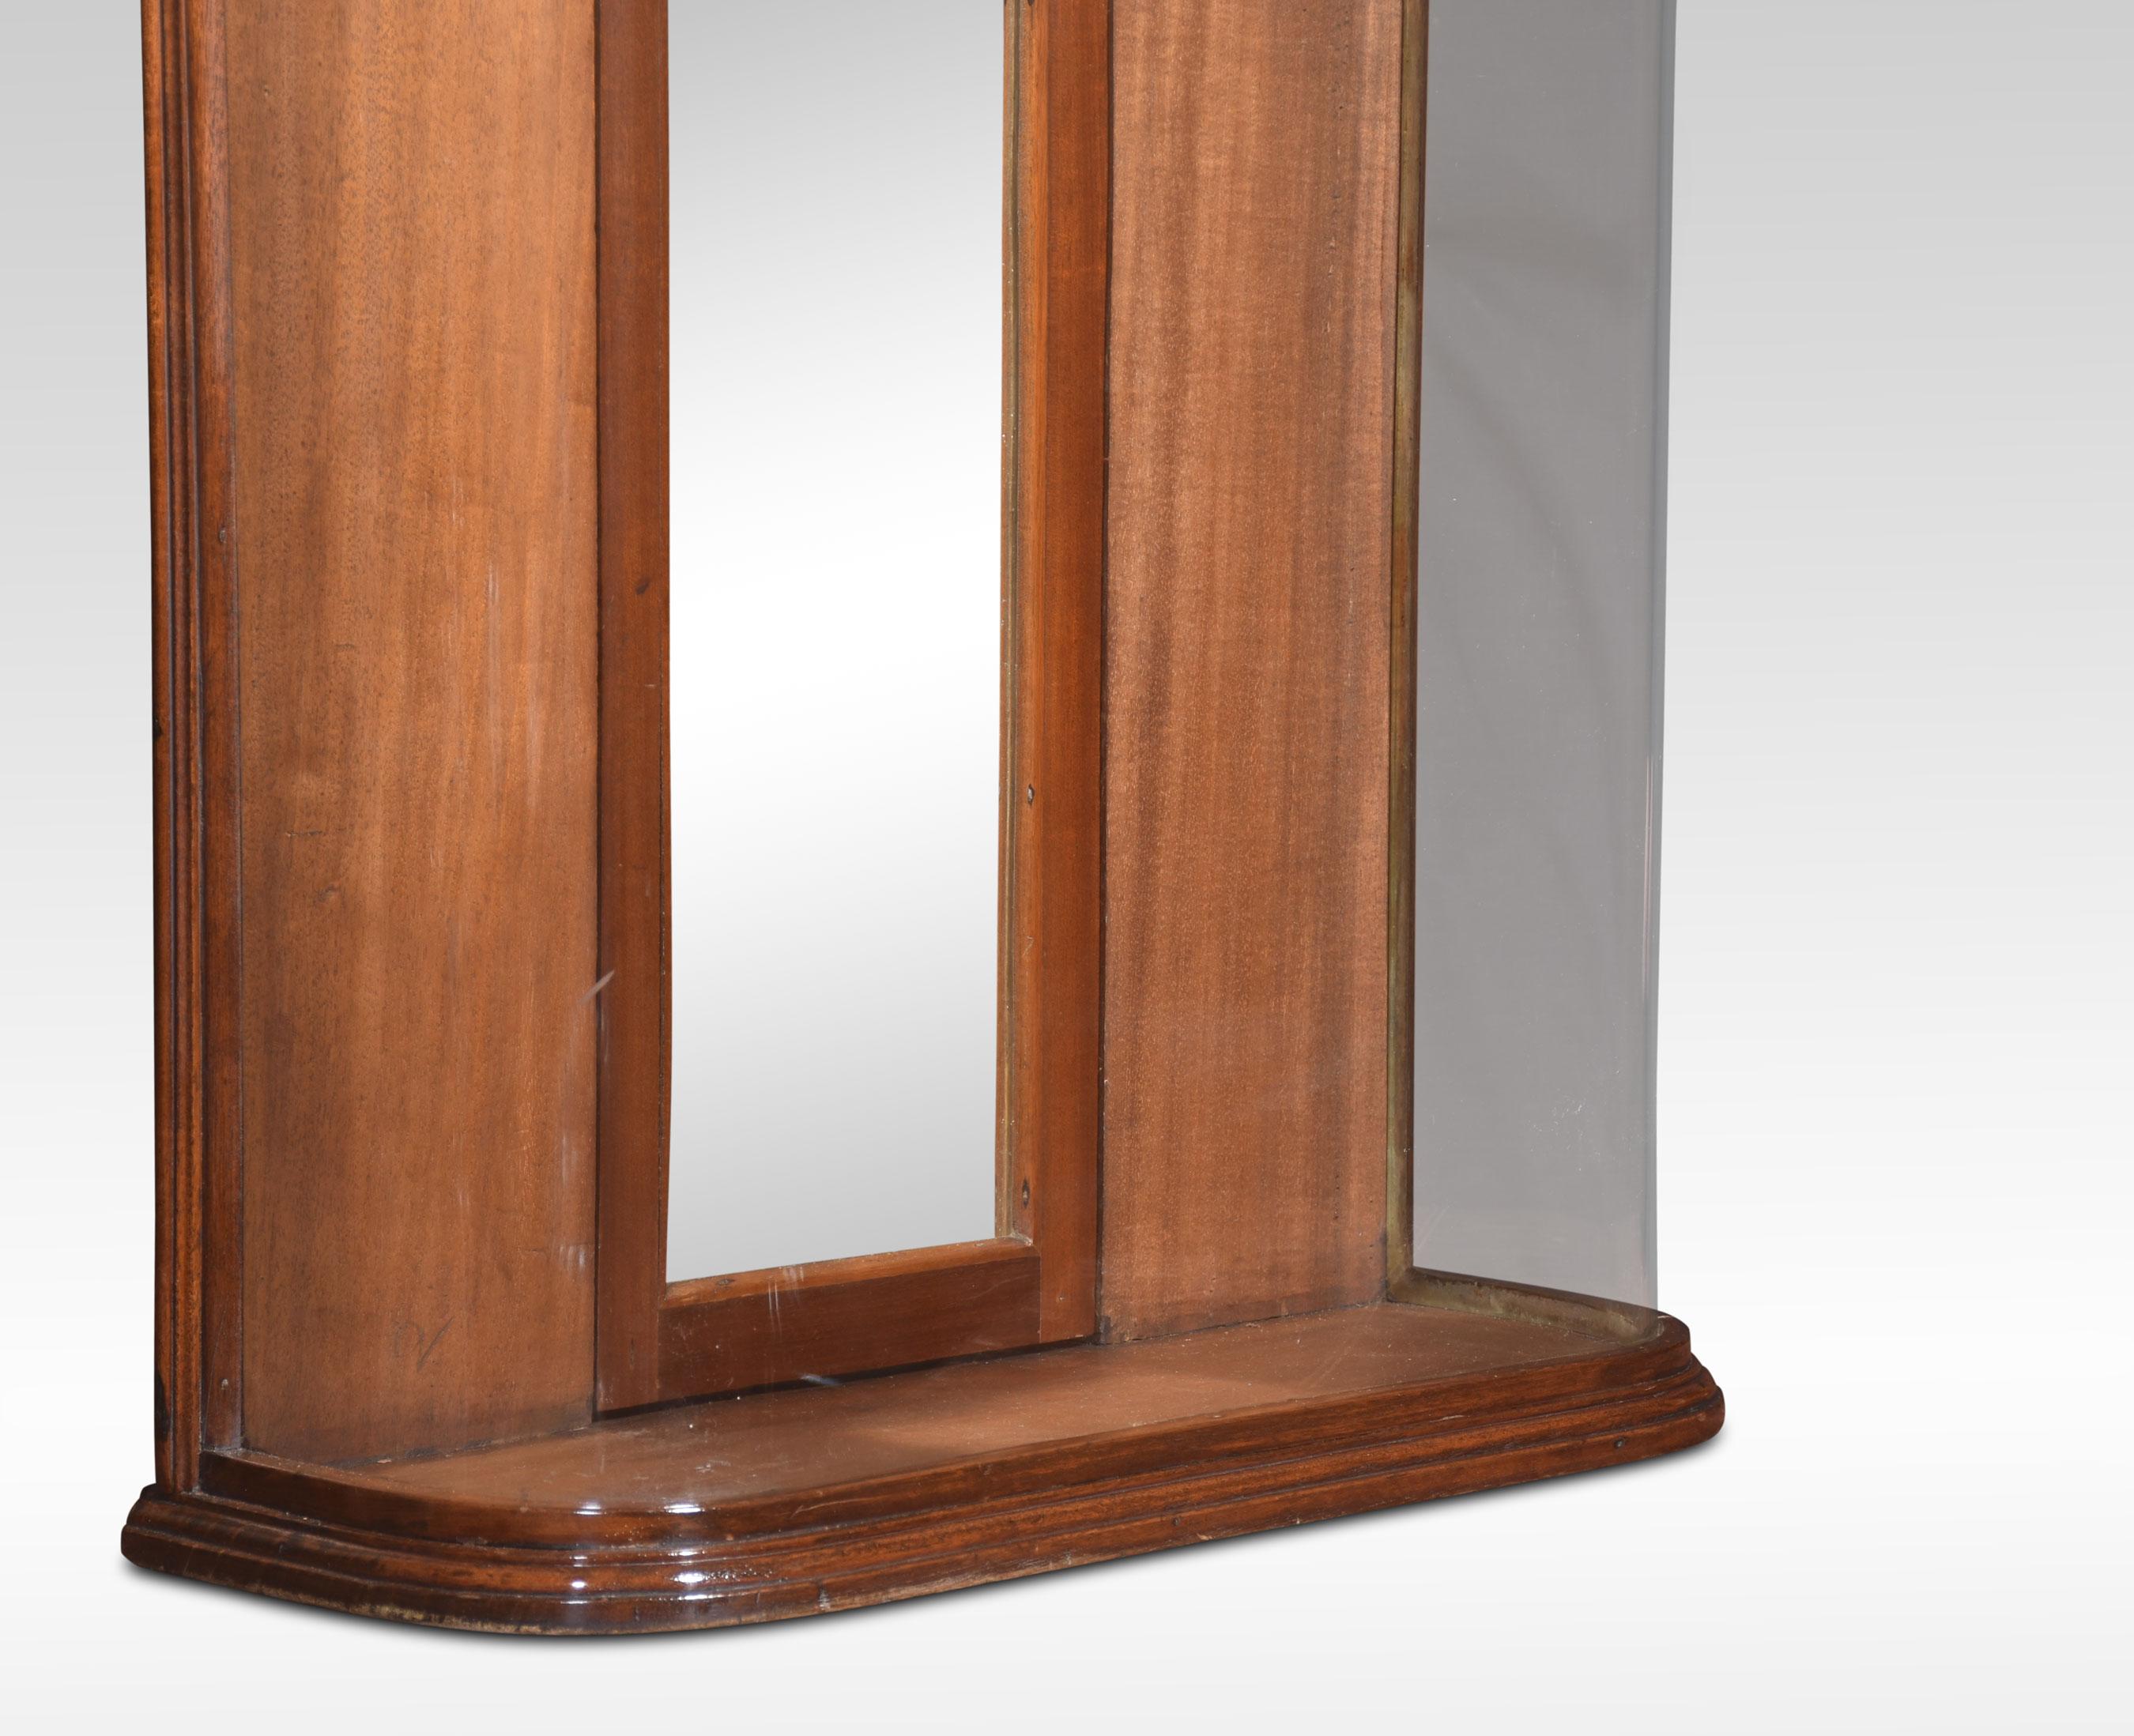 Bow-fronted glass cabinet the shaped top with carved detail above bow-fronted glazed display case with mirrored door to the rear, all raised up on a plinth base.
Dimensions
Height 47 Inches
Width 27 Inches
Depth 10.5 Inches